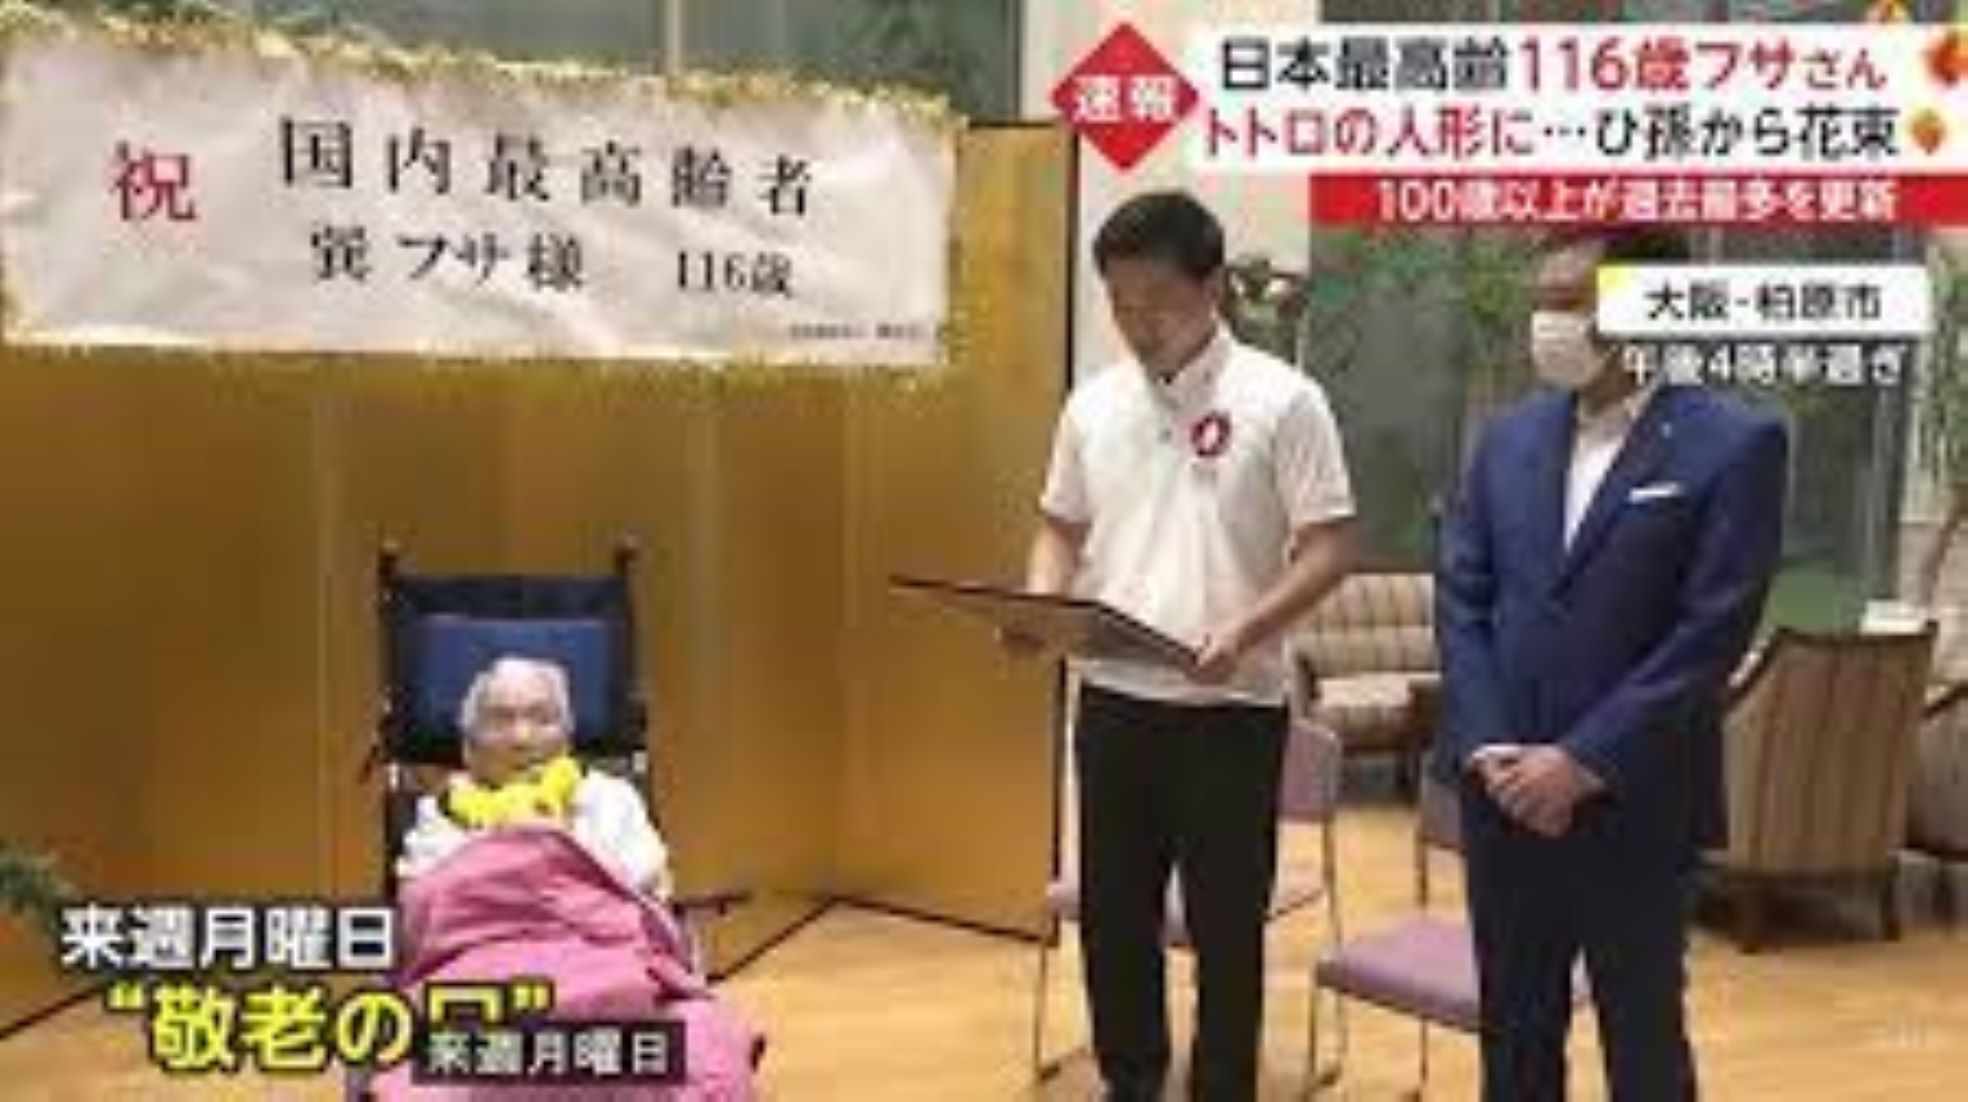 Japan’s Oldest Person Dies At 116